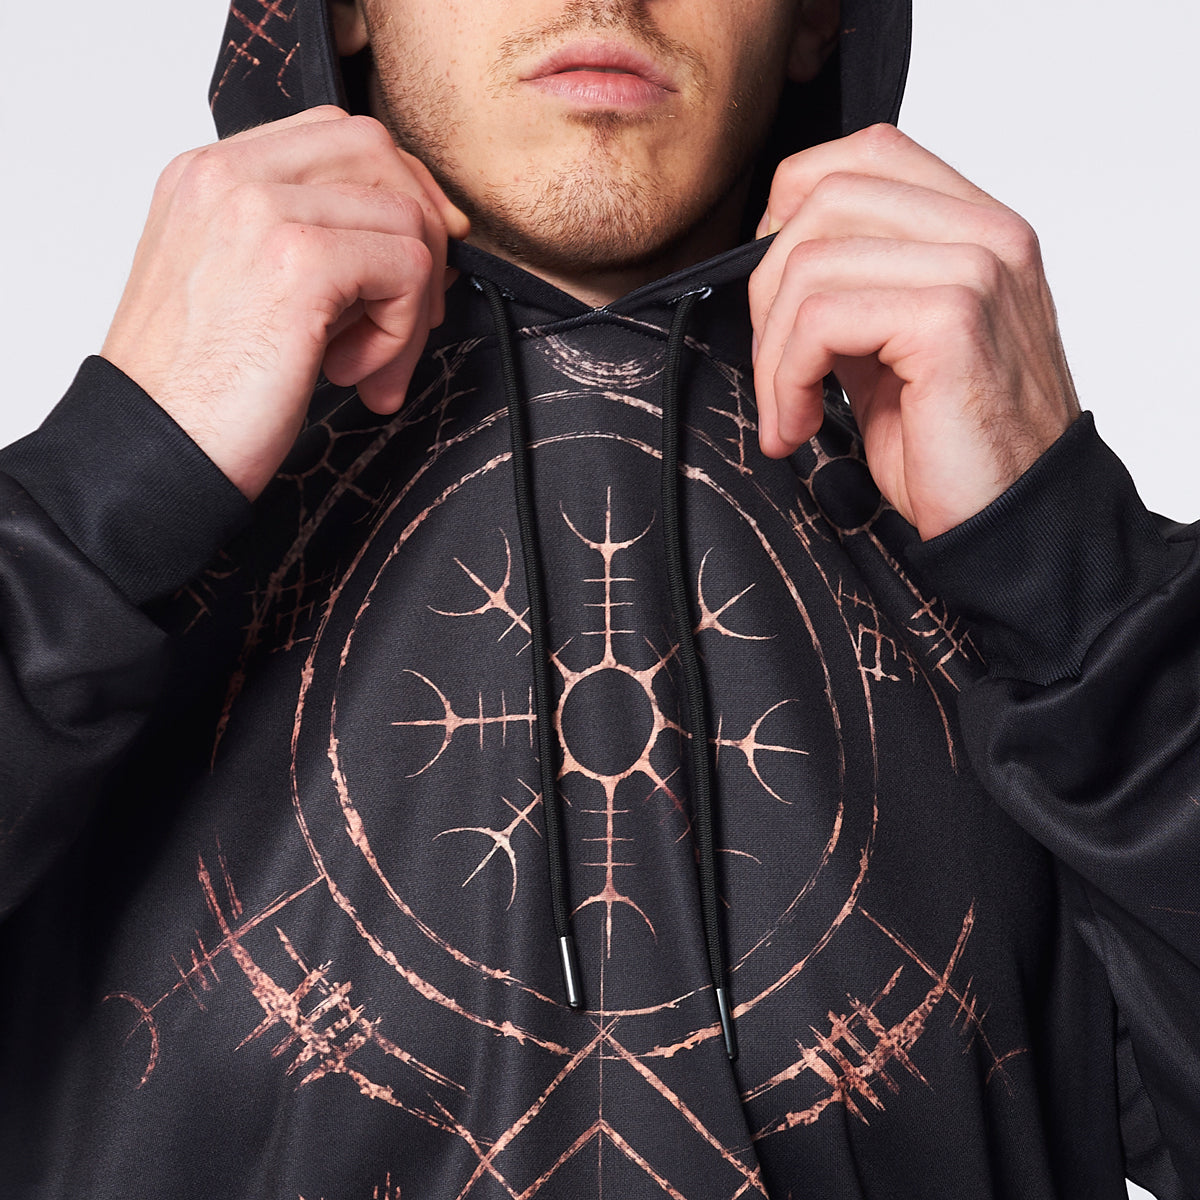 The Stave Pullover Hoodie